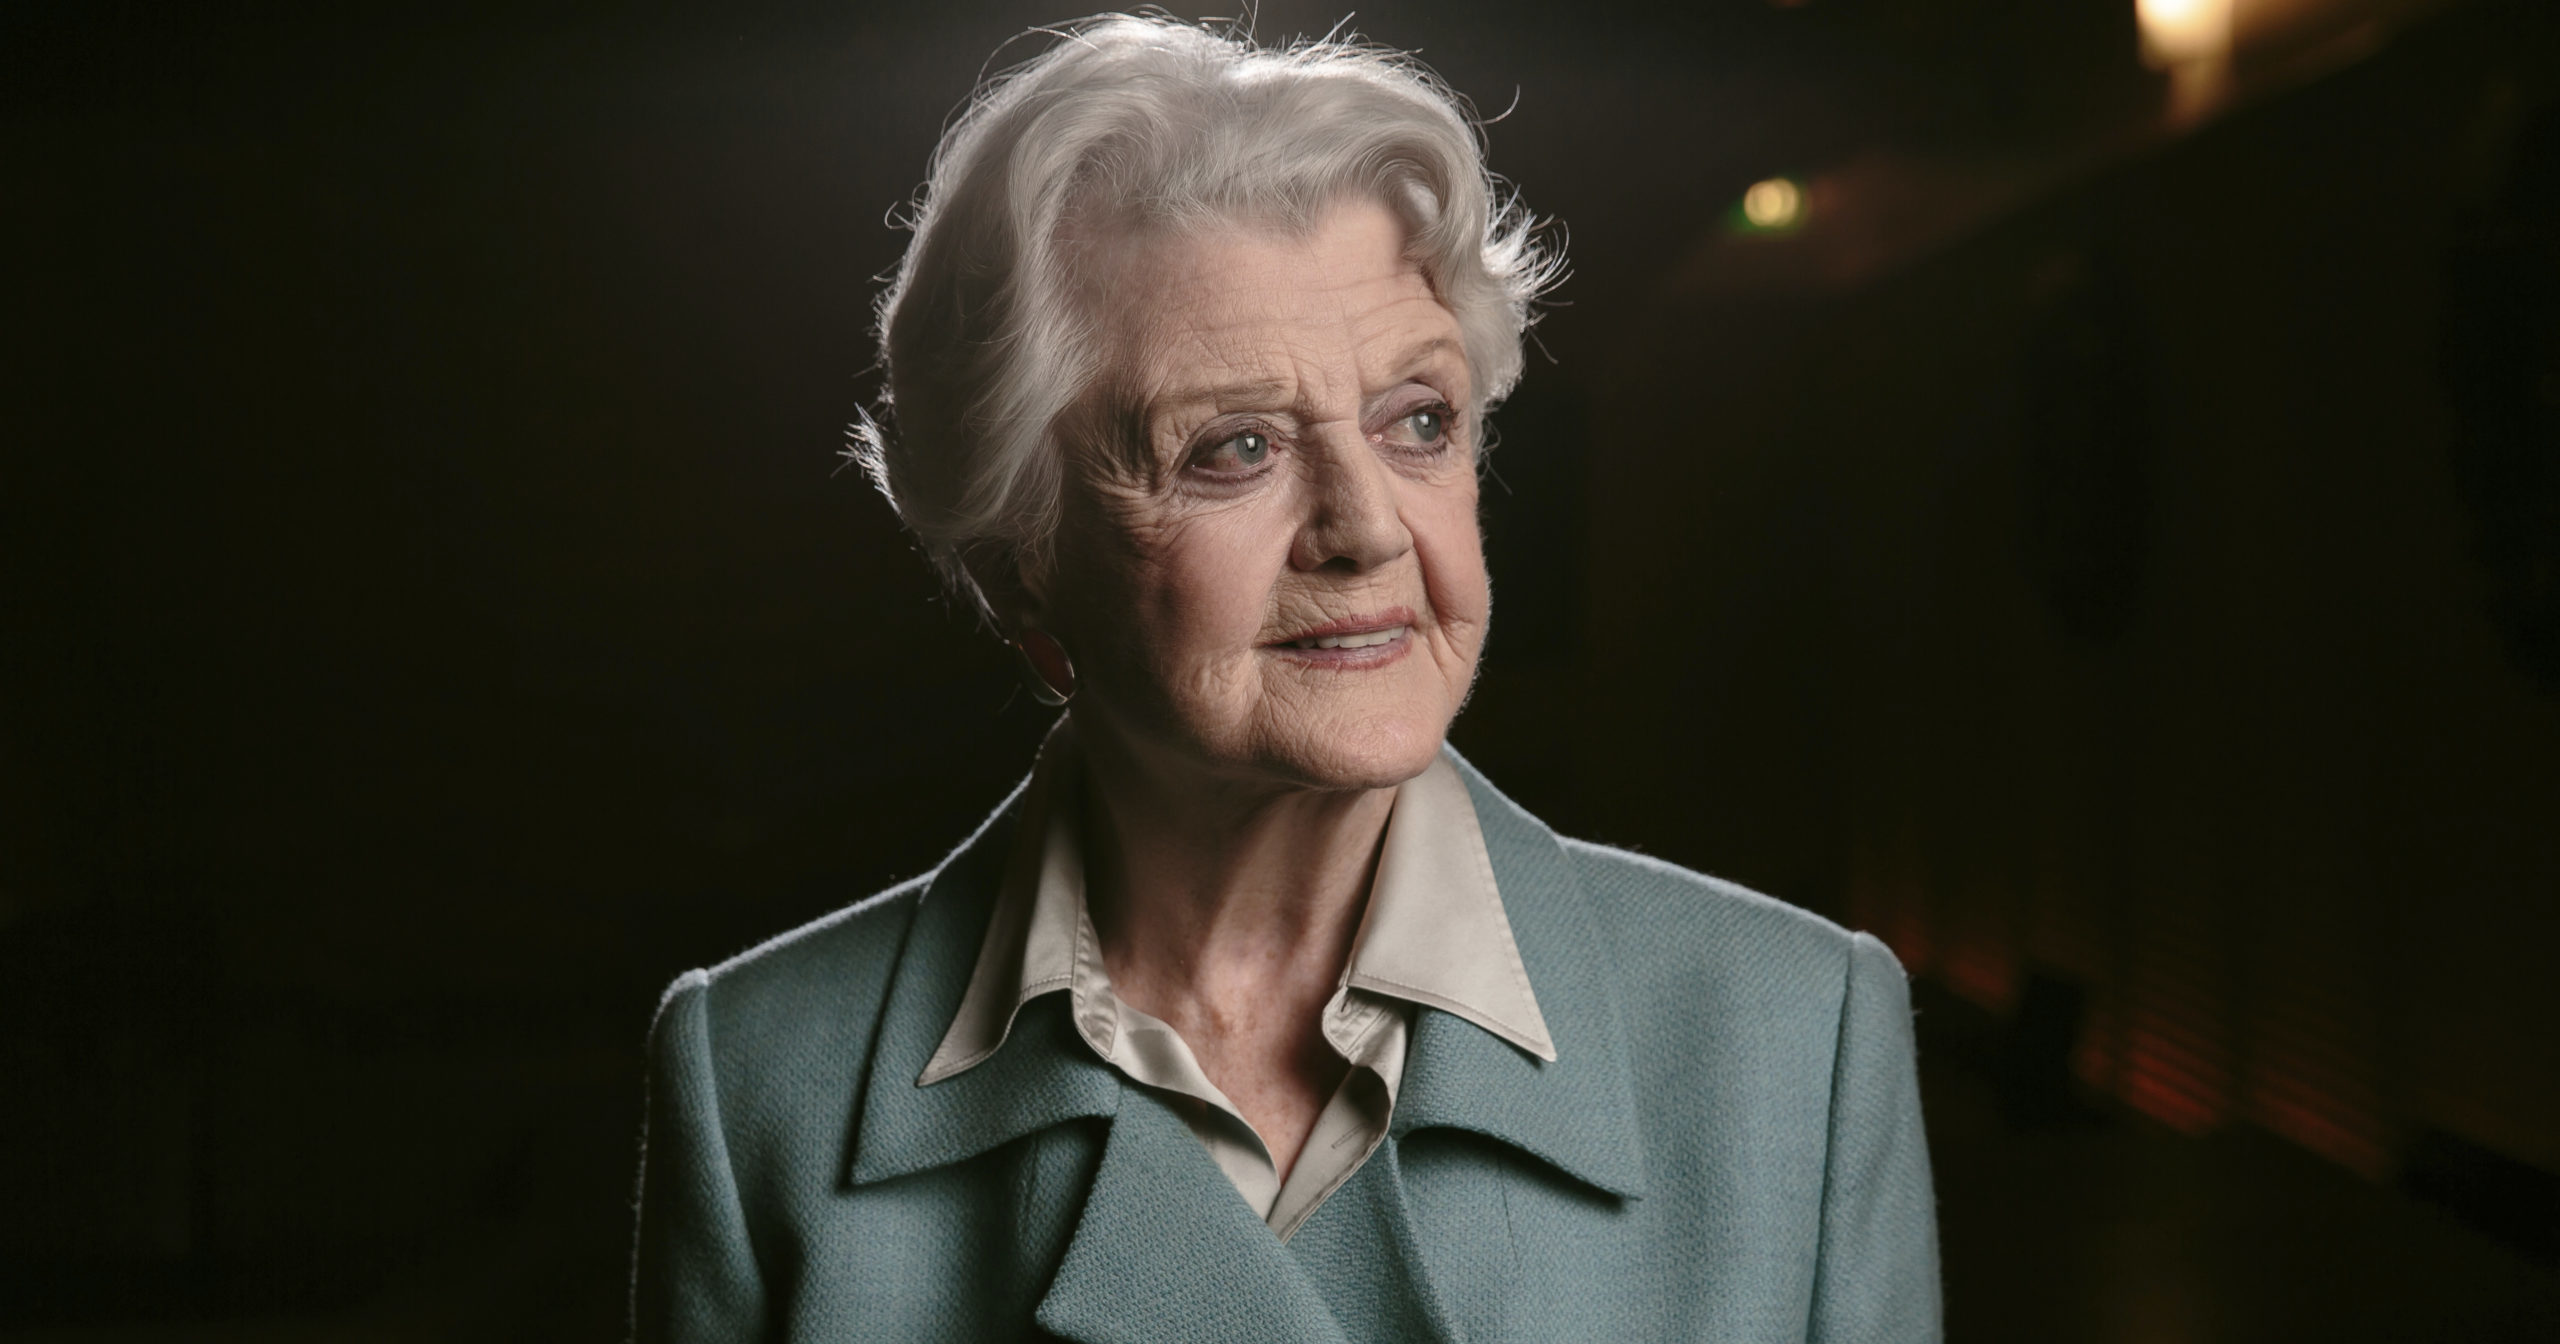 Angela Lansbury poses for a portrait in Los Angeles on Dec. 16, 2014.